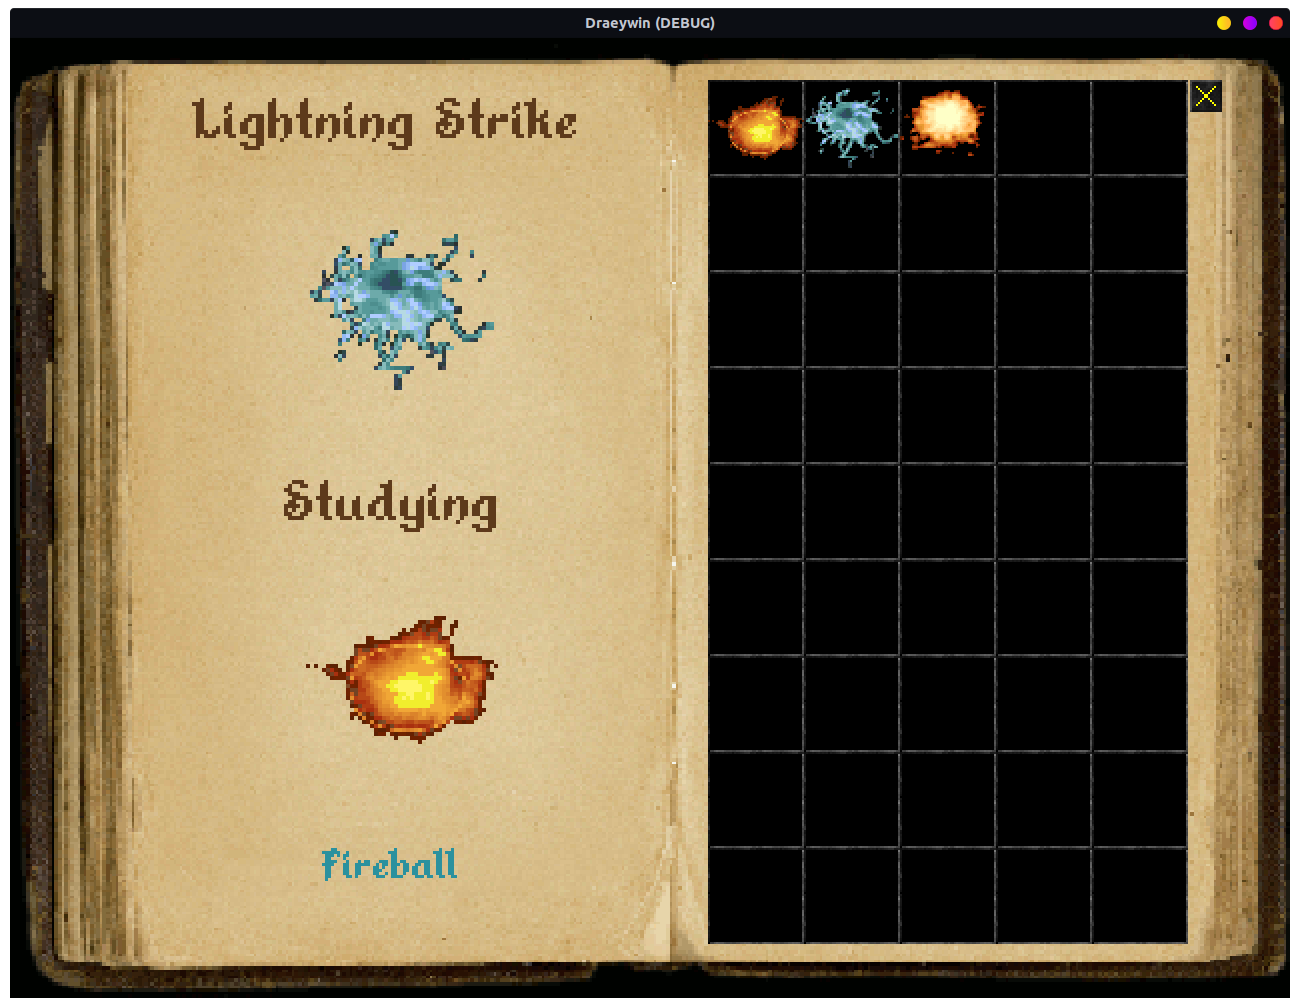 Screenshot of Draeywin showing the Spellbook using the inventory system to store the spells